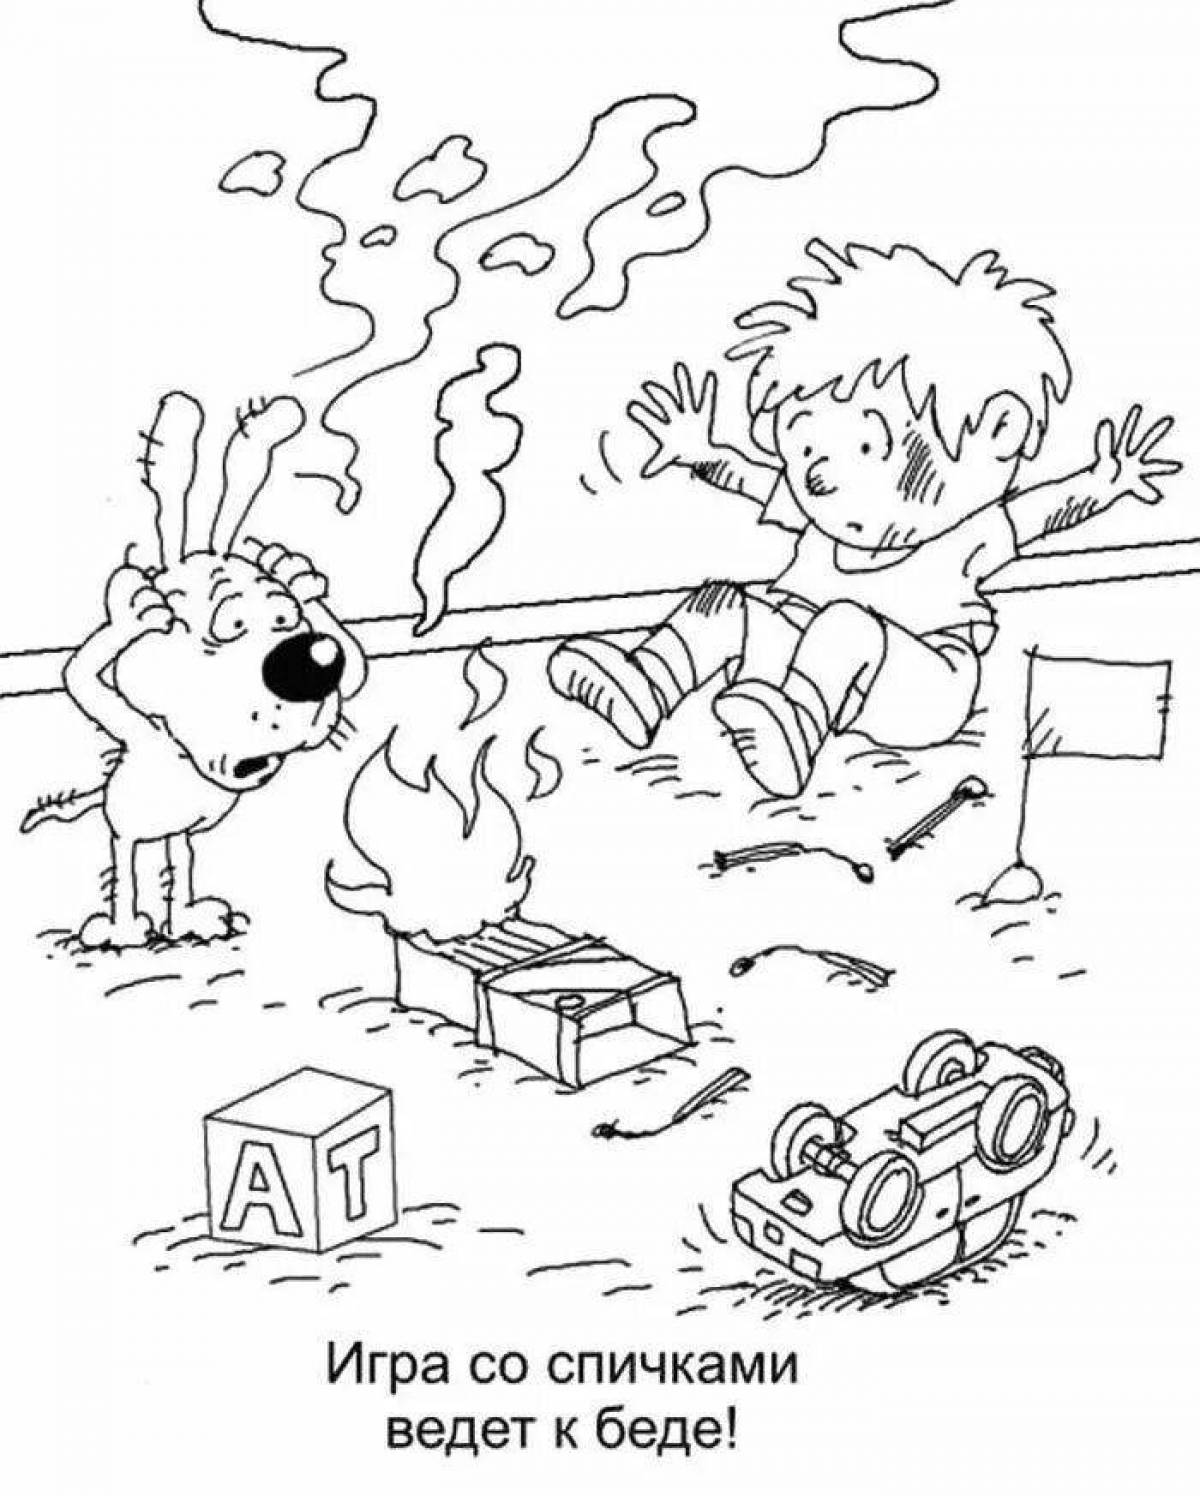 Fire safety live coloring page